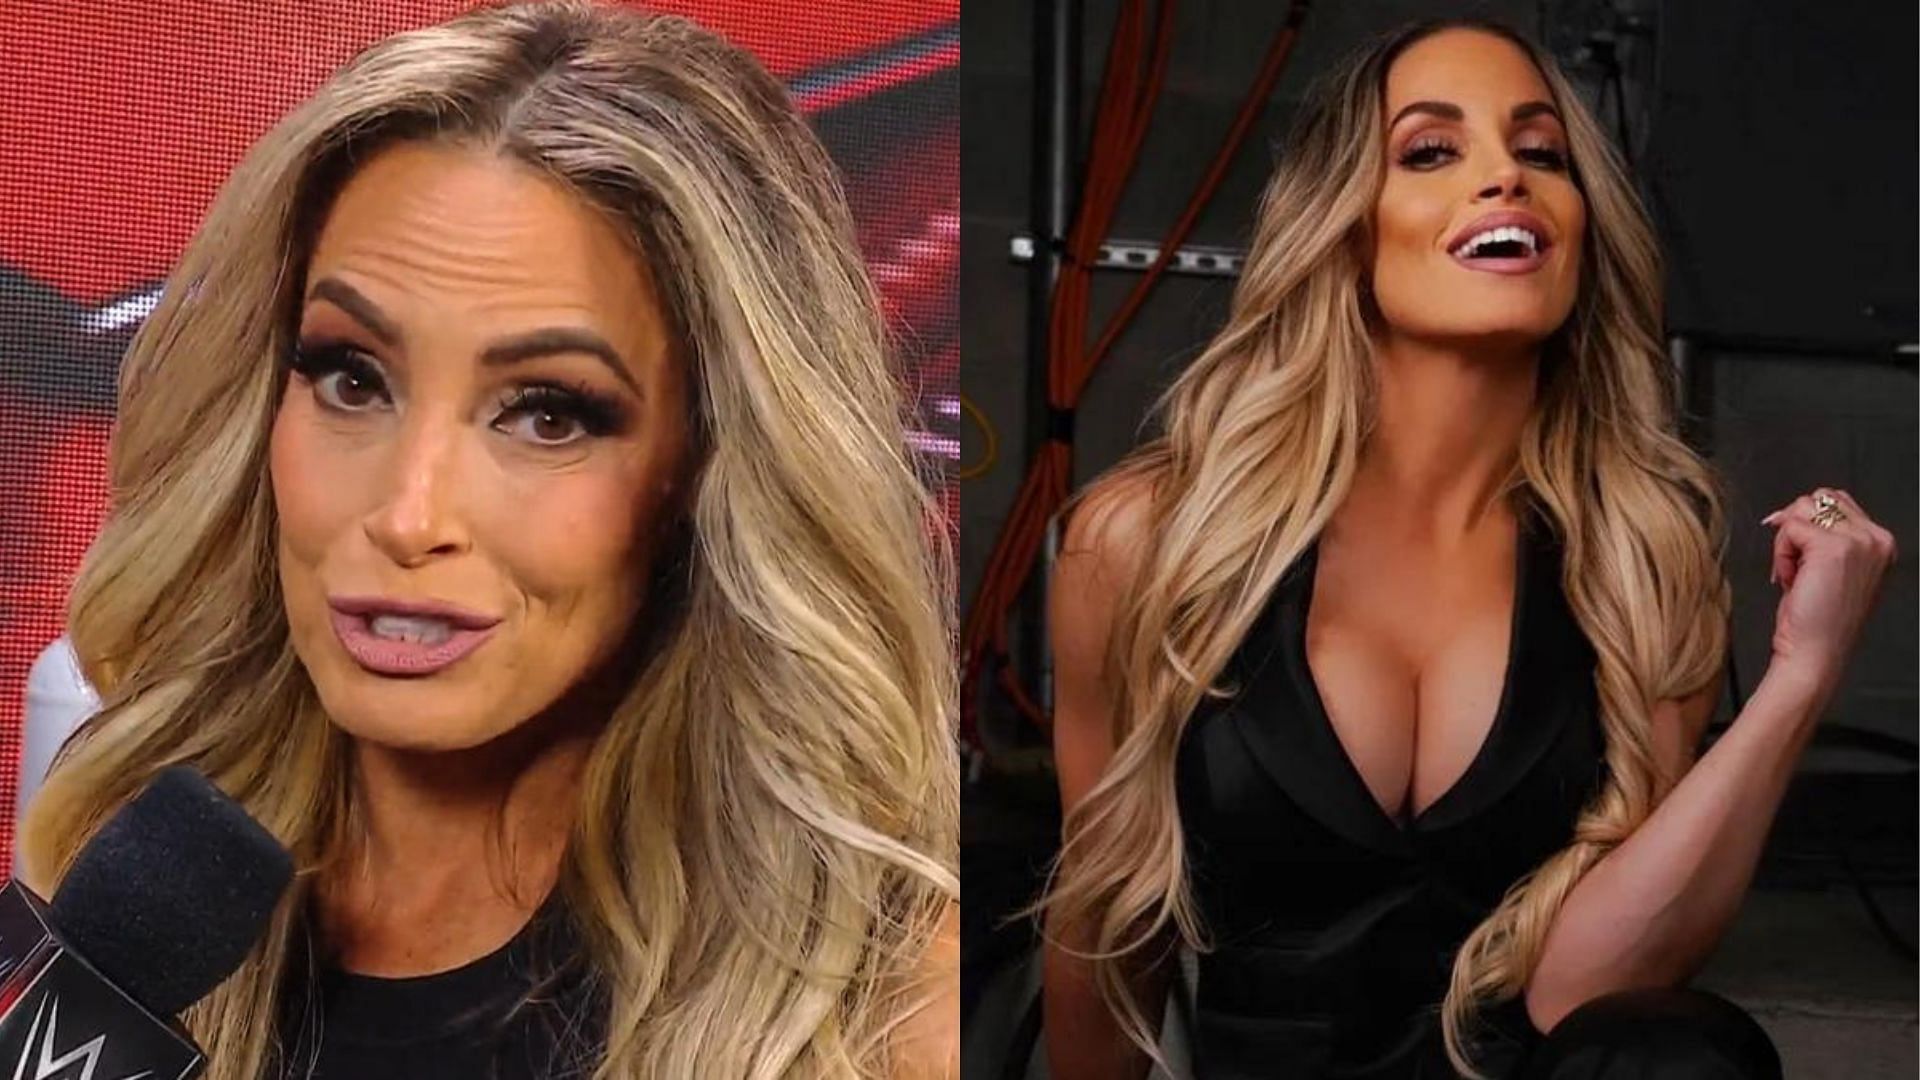 Trish Stratus will compete for a spot in the Money in the Bank Ladder Match